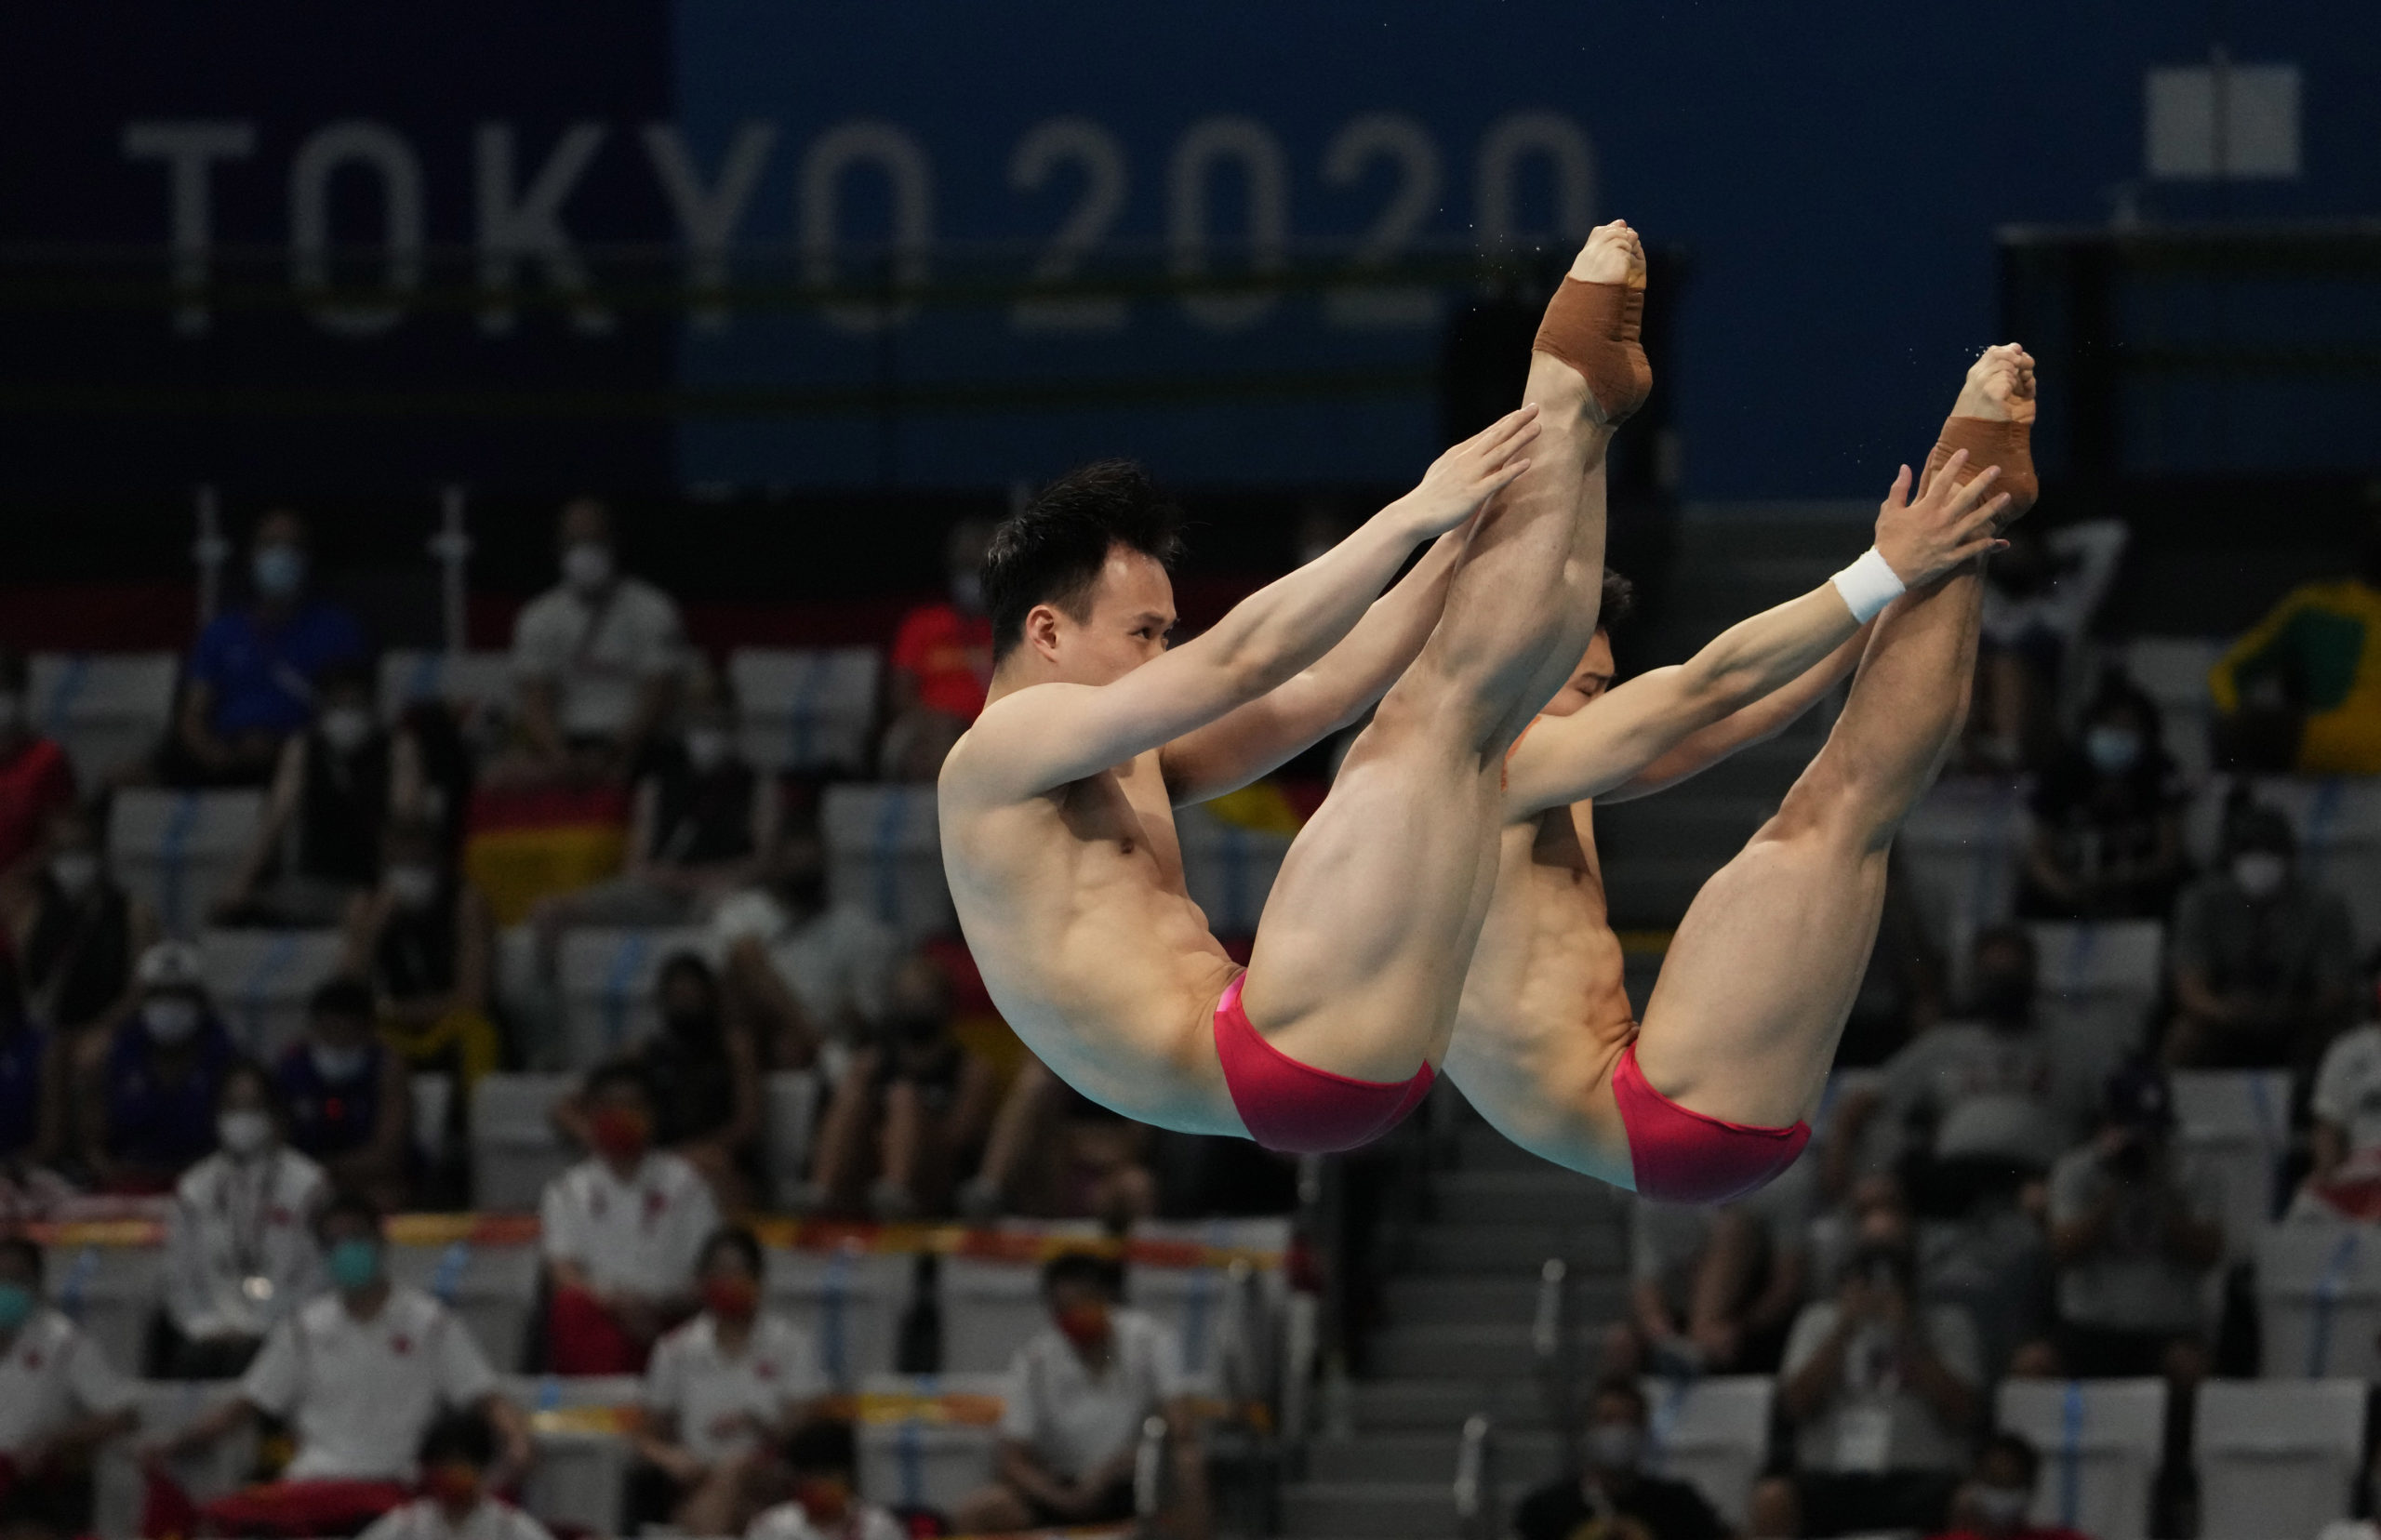 Wang Zongyuan and Xie Siyi (CHN) in the men's 3m springboard synchronized diving during the Tokyo 2020 Olympic Summer Games at Tokyo Aquatics Centre.